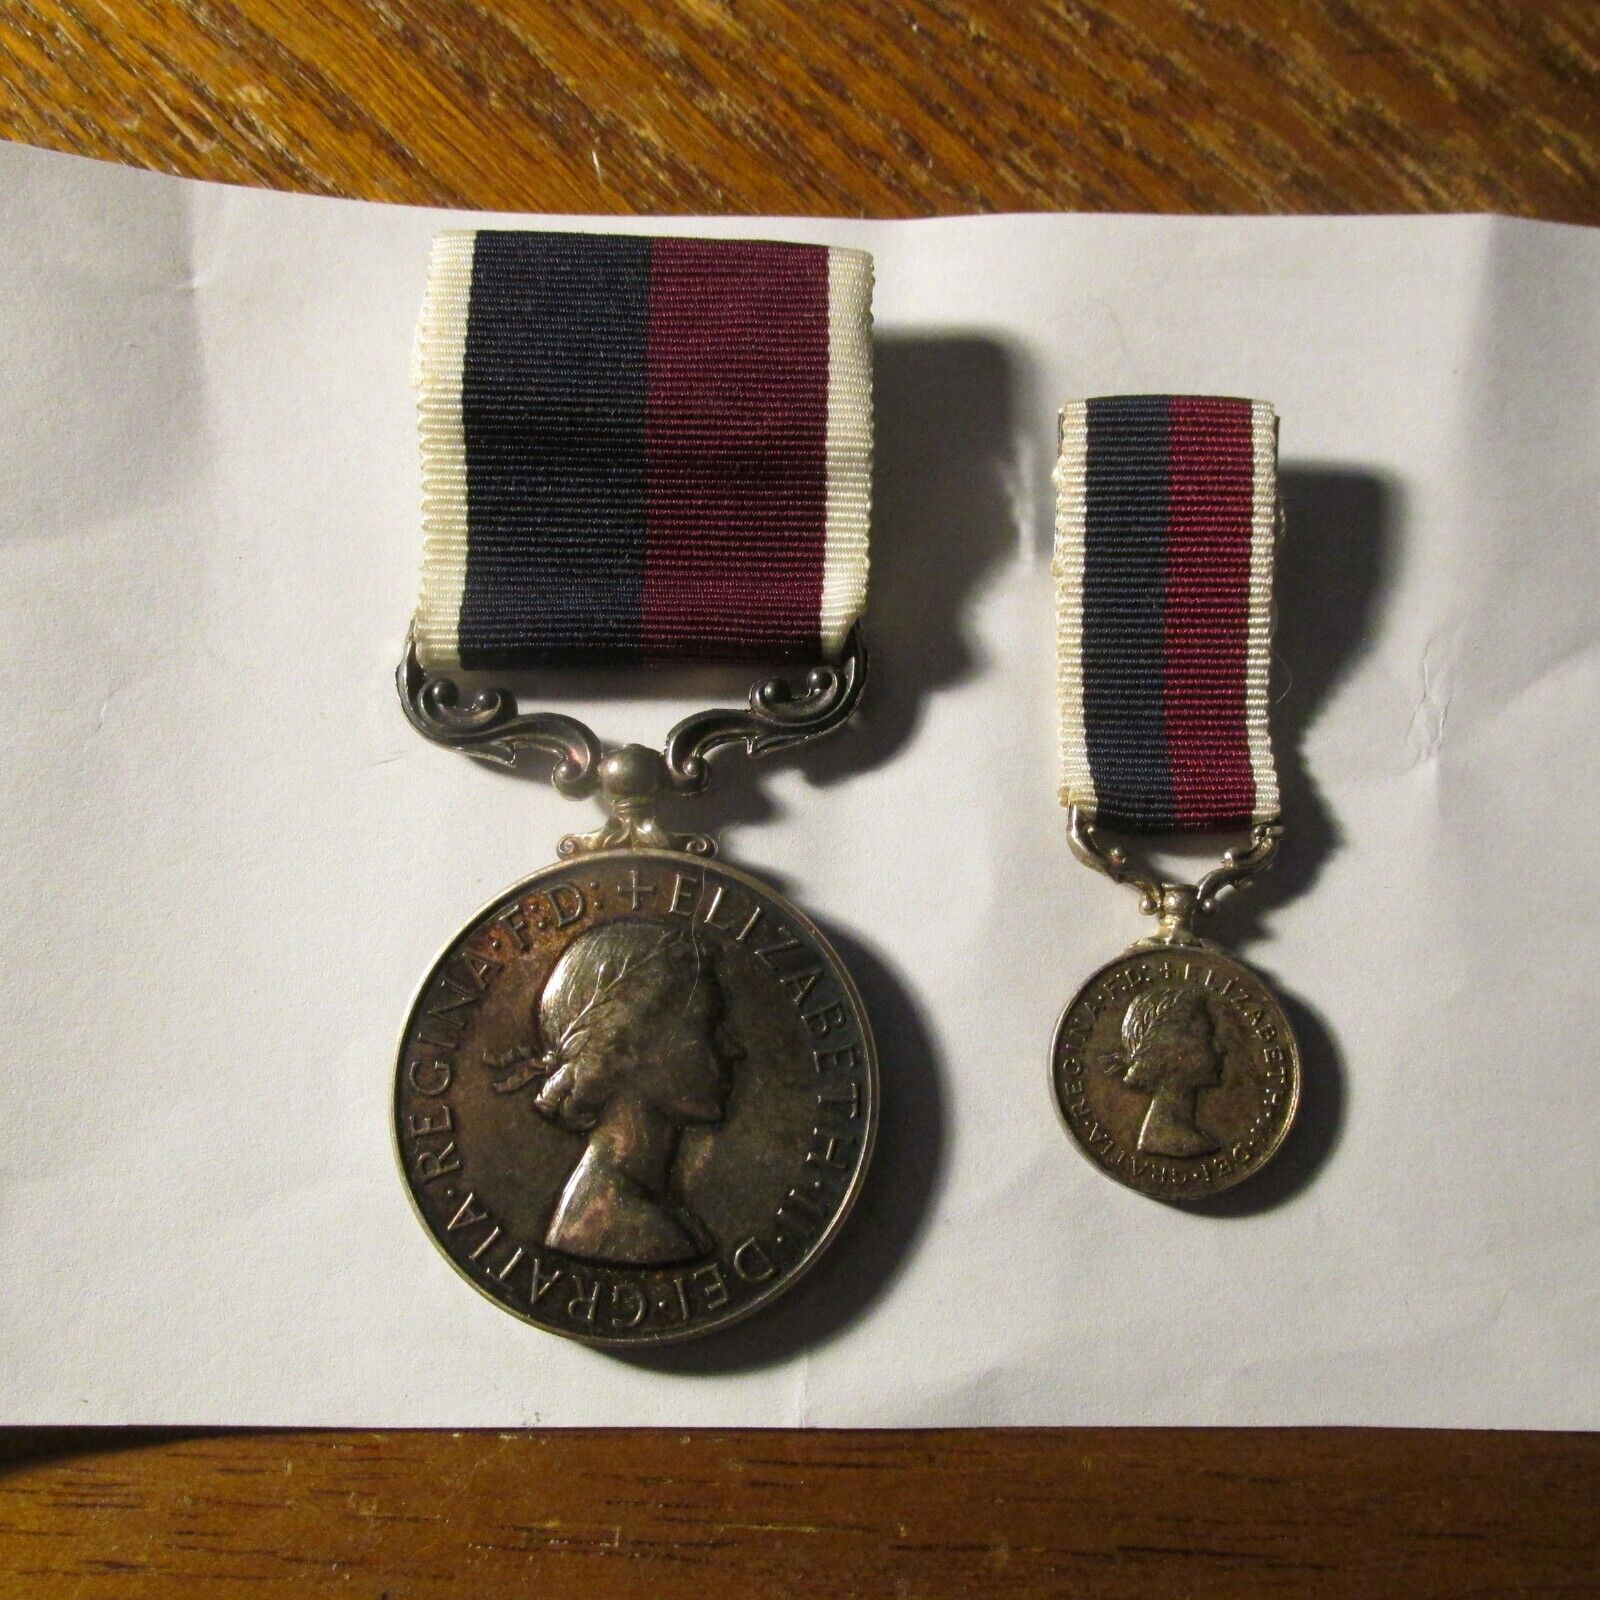 ROYAL AIR FORCE LSGC MEDAL with matching miniature.